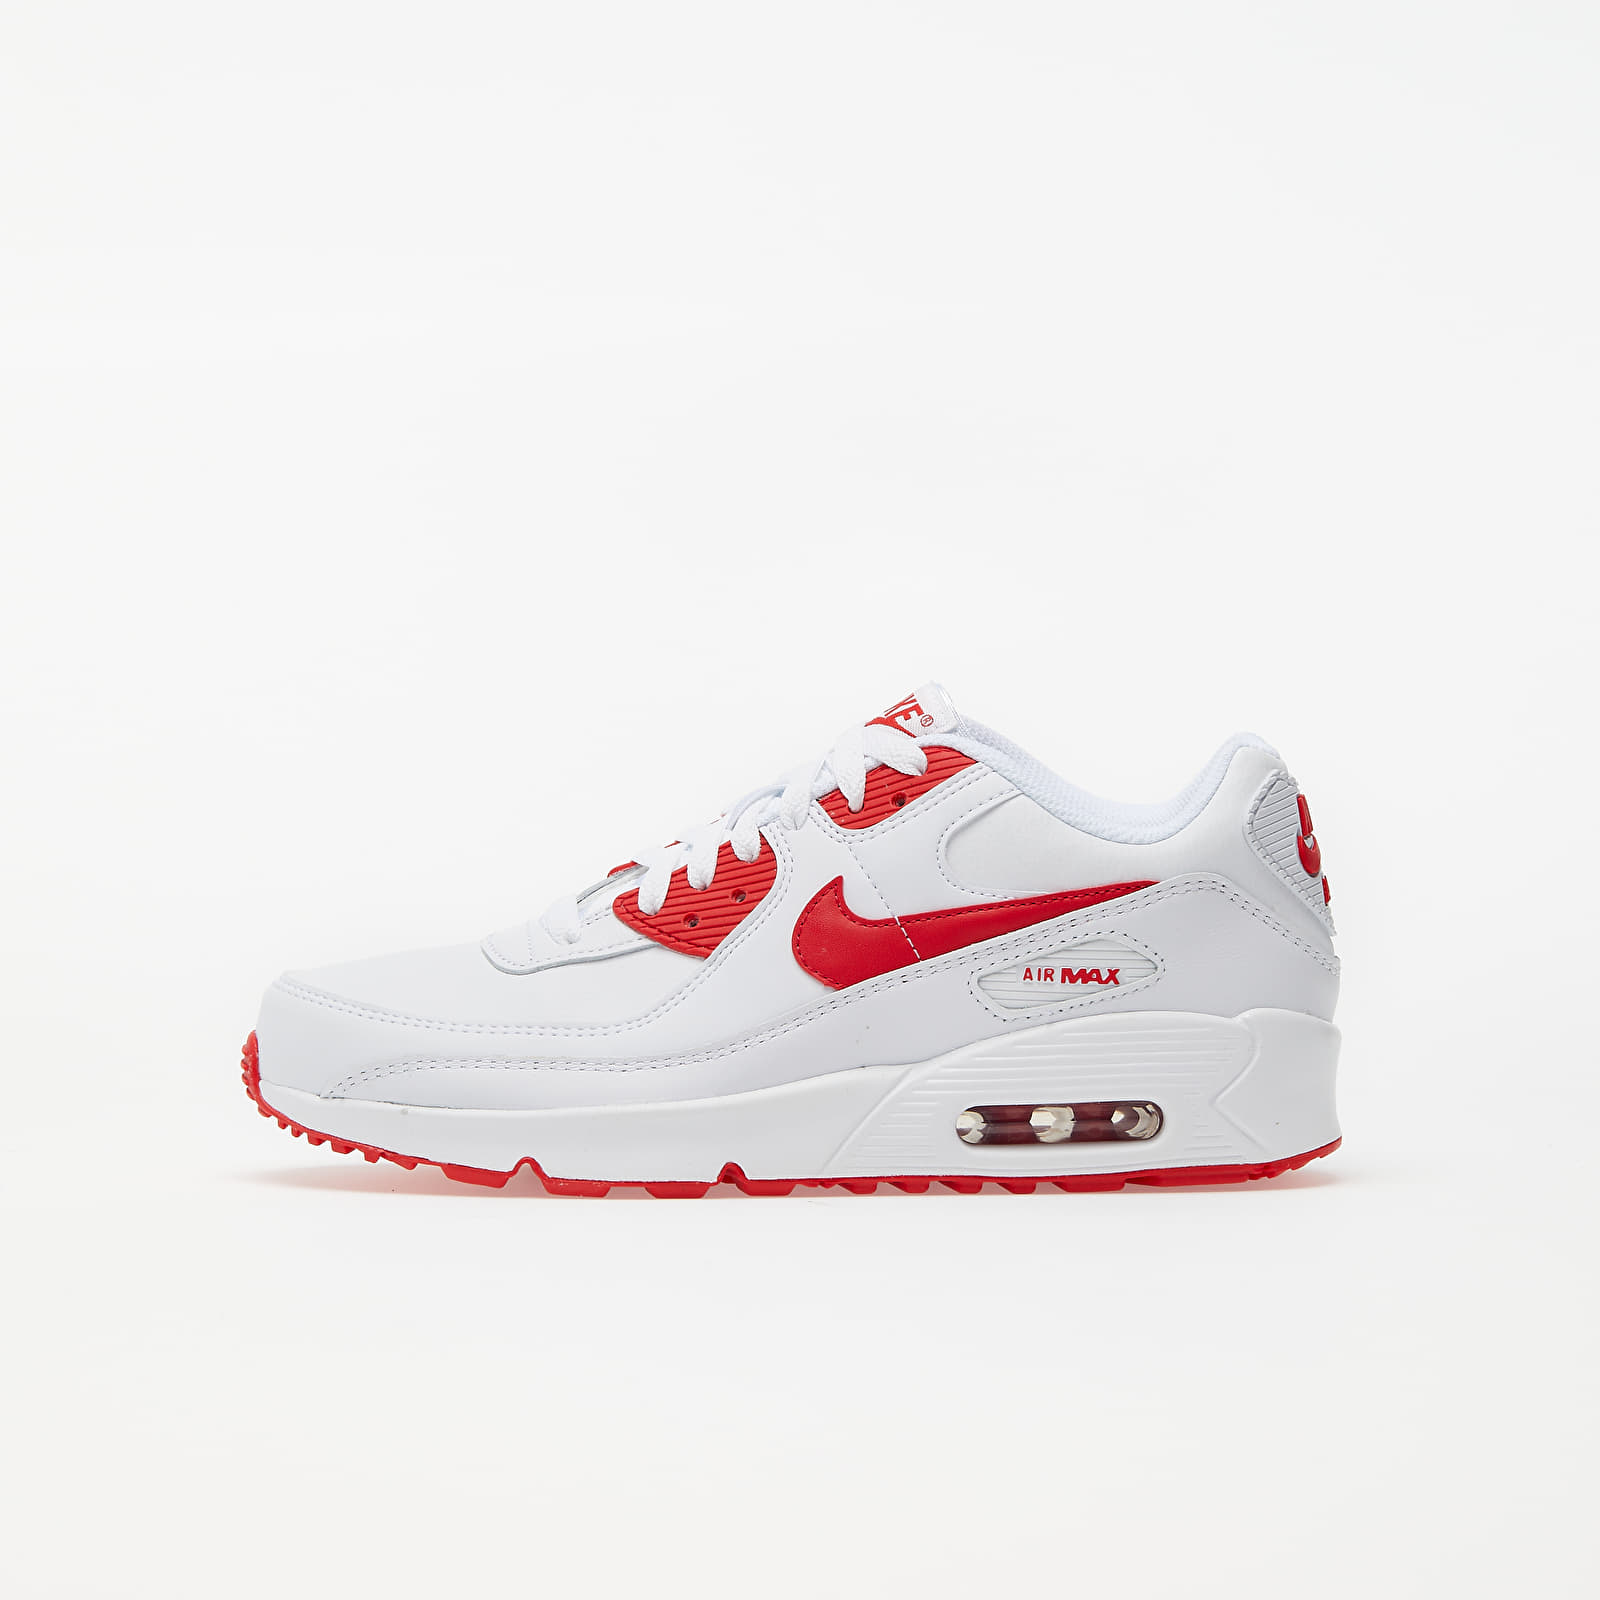 Nike Air Max 90 Leather (GS) White/ Hyper Red-Black